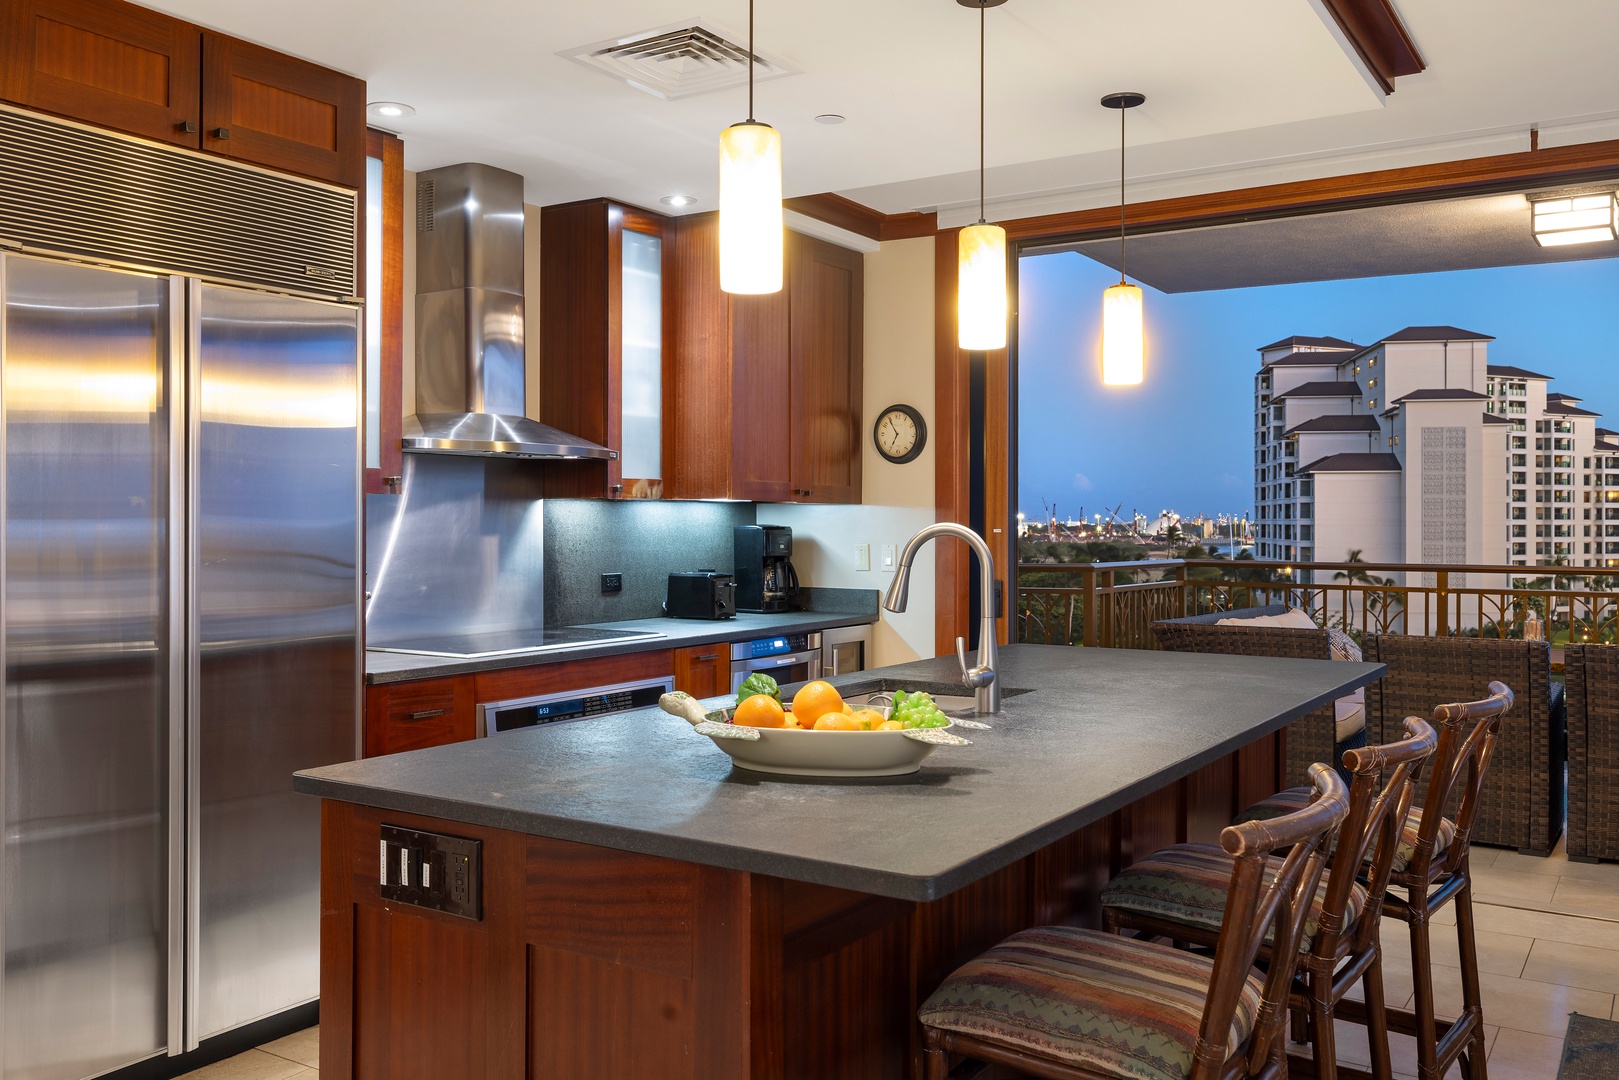 Kapolei Vacation Rentals, Ko Olina Beach Villas O724 - A Roy Yamagucci designed kitchen for your culinary adventures.